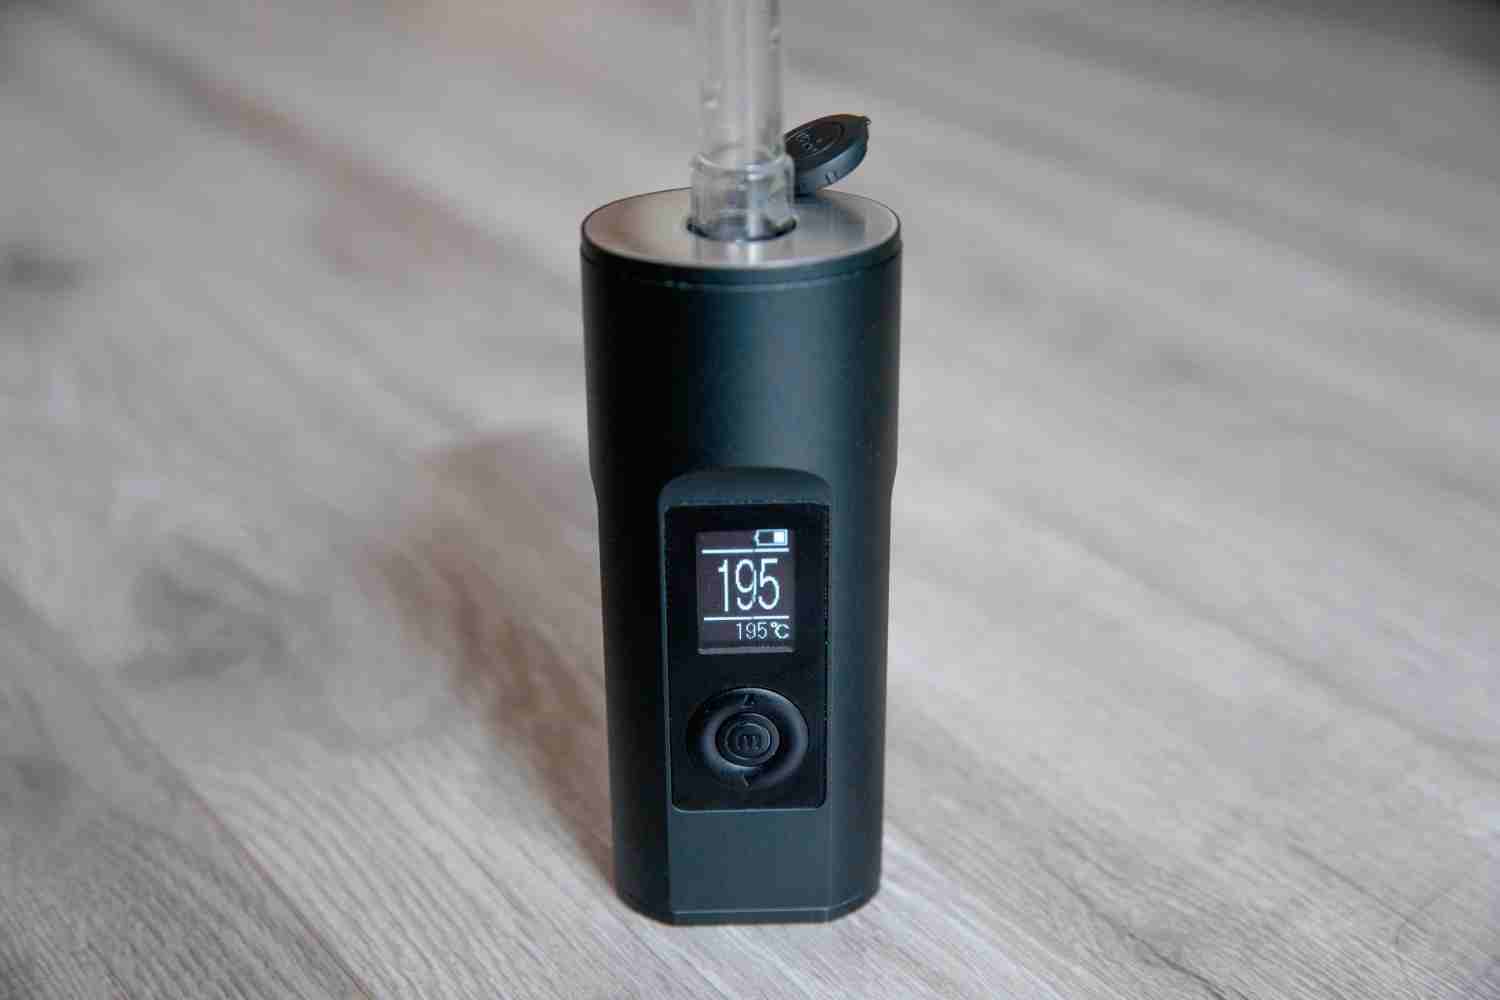 Arizer solo 2 display